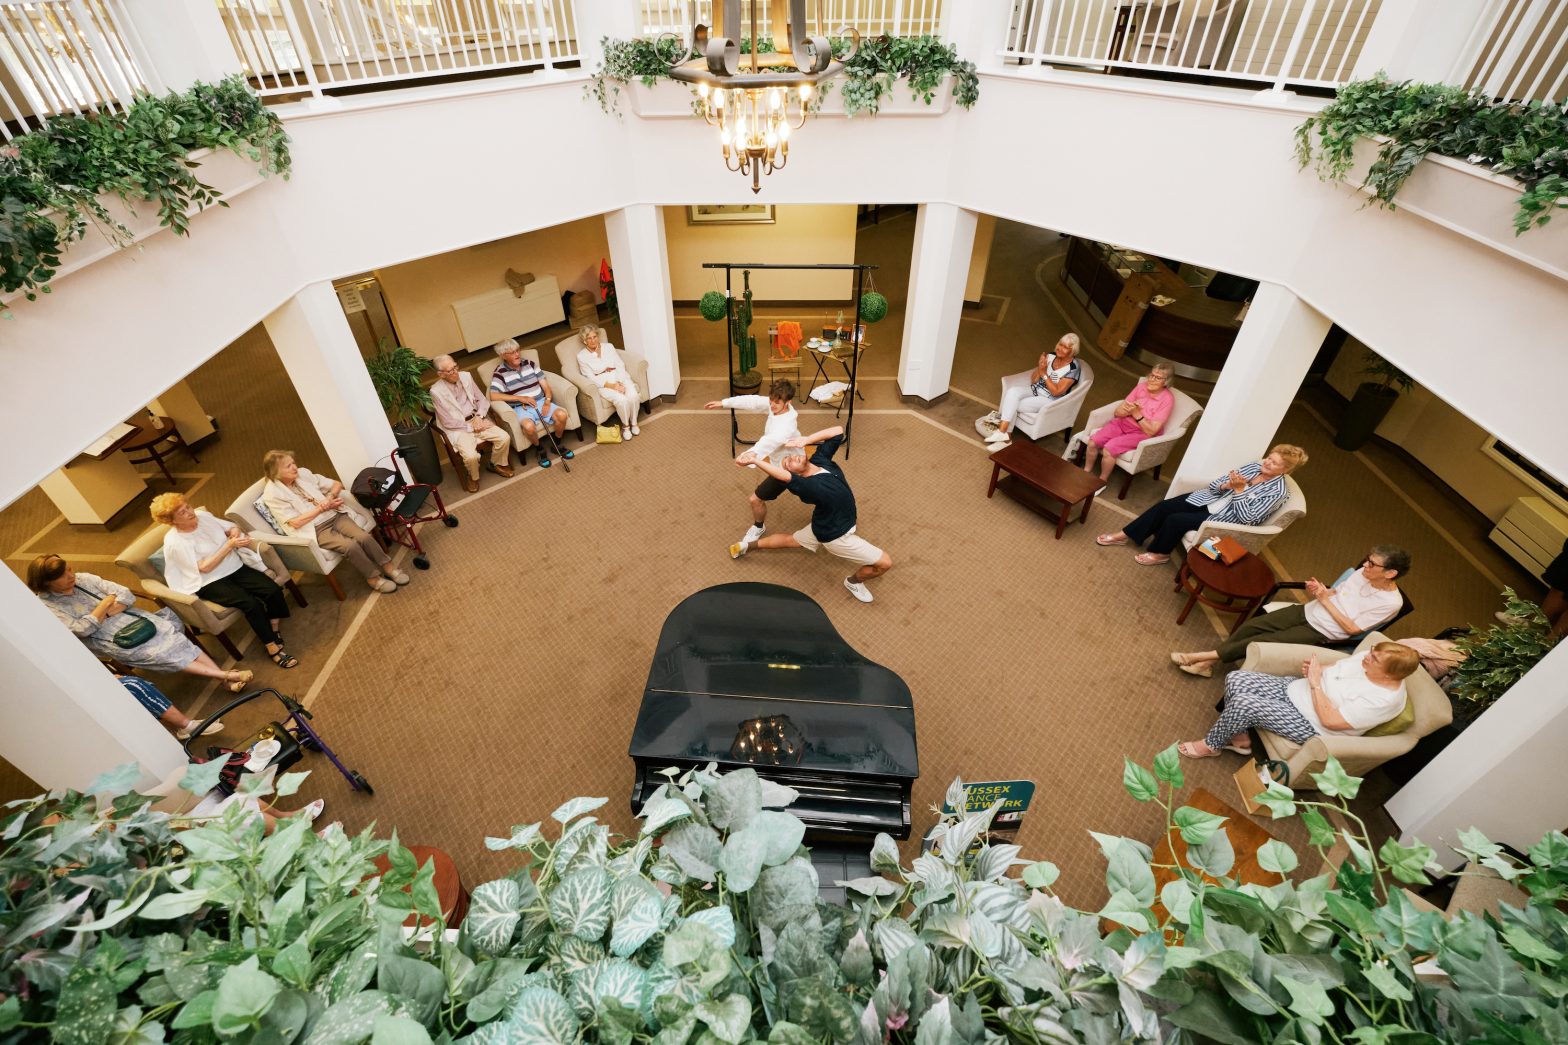 Two male dancers are performing in the centre of a retirement village. The view is from a balcony and look down on the dancers and audience. The audience are sat around the edge of the space. There is also a piano, plants and a carpeted floor.